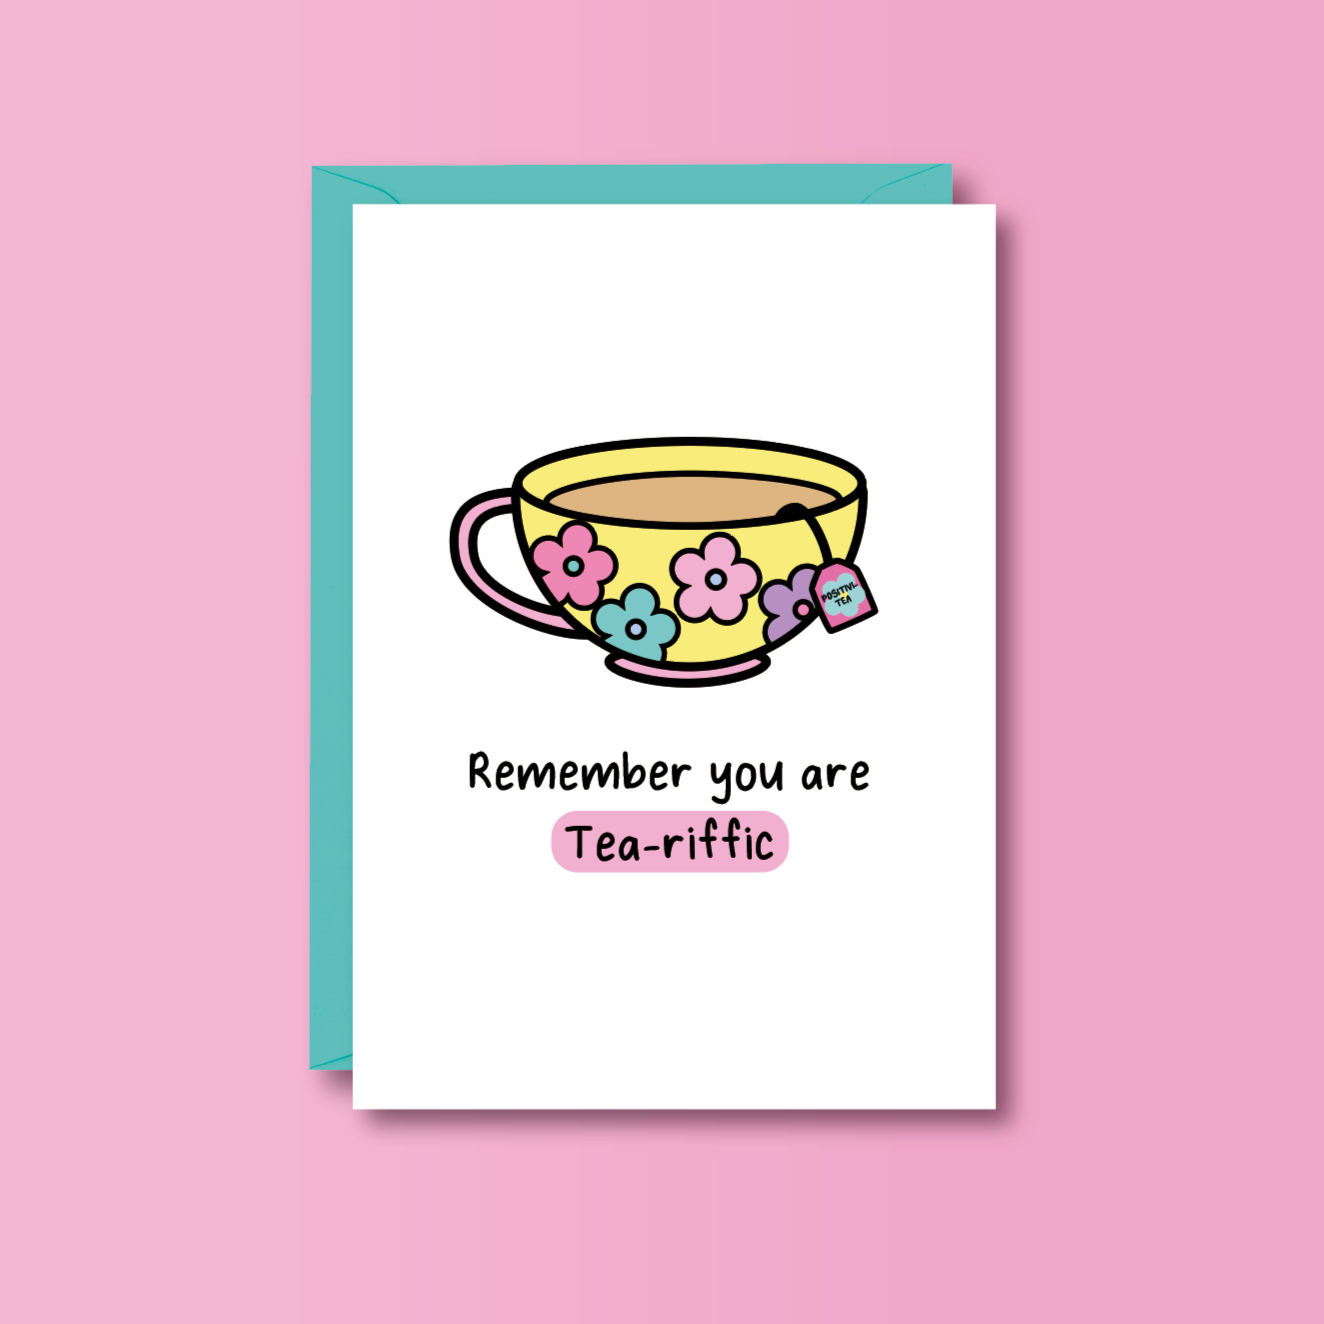 Remember you are tea-riffic card